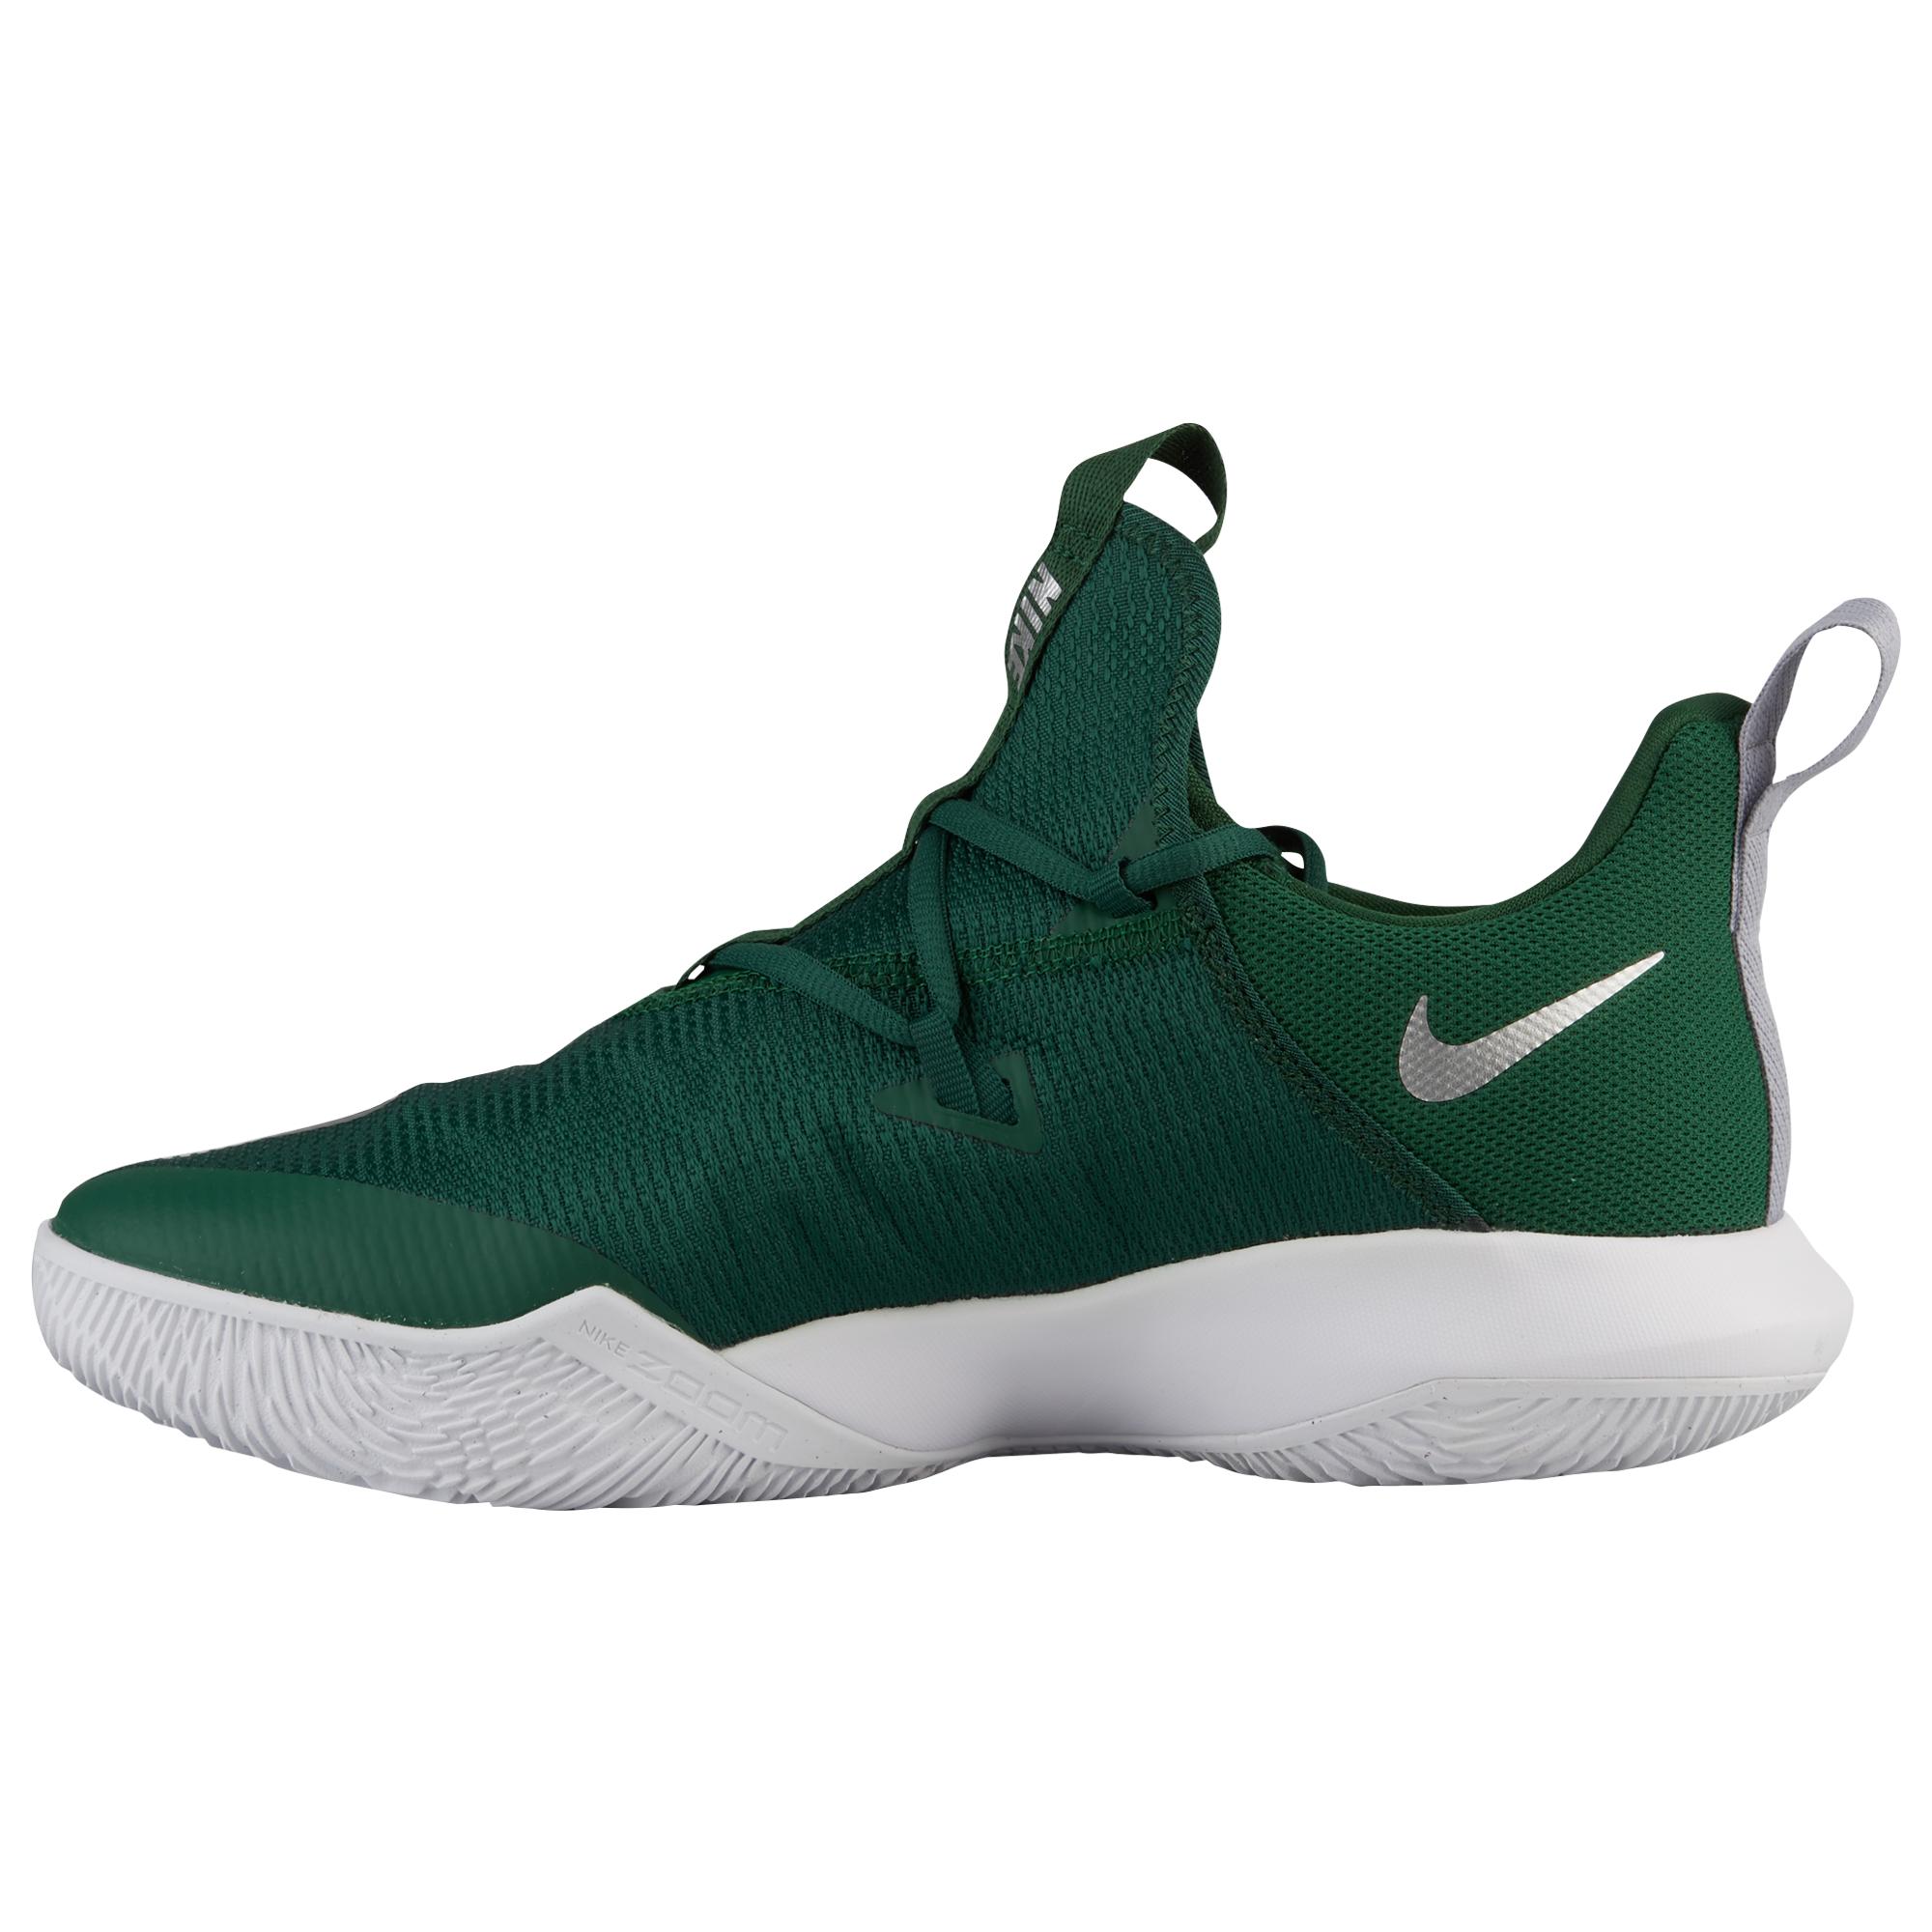 Nike Zoom Shift 2 Basketball Shoes in 